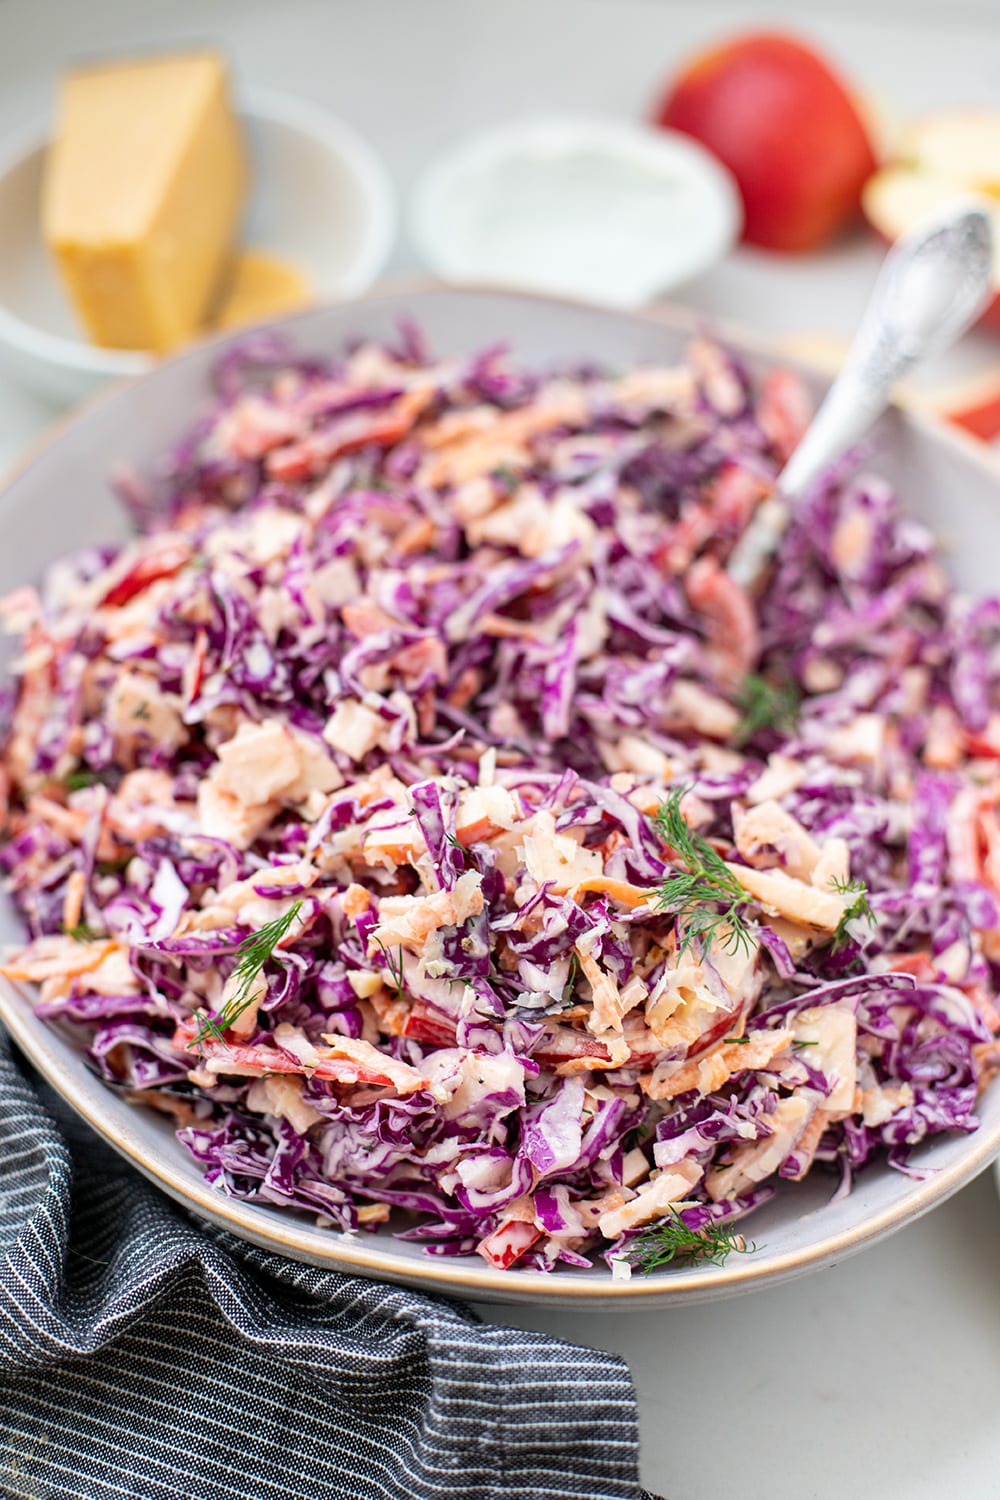 Recipe for red cabbage coleslaw with apple and Parmesan